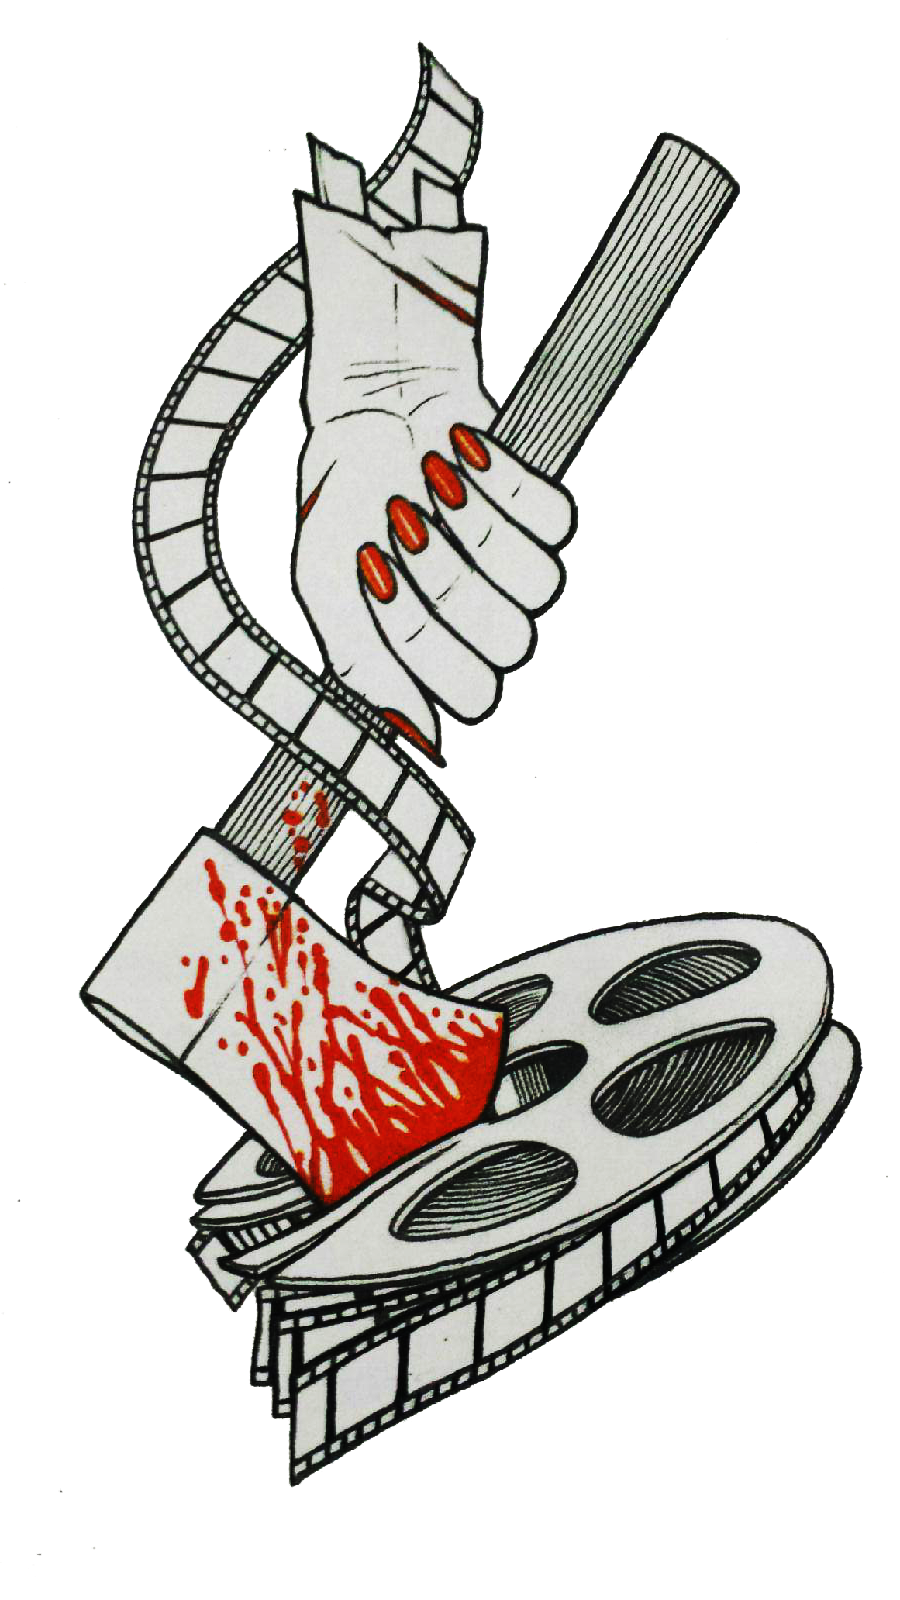 Evidence clipart mystery movie. About women in horror